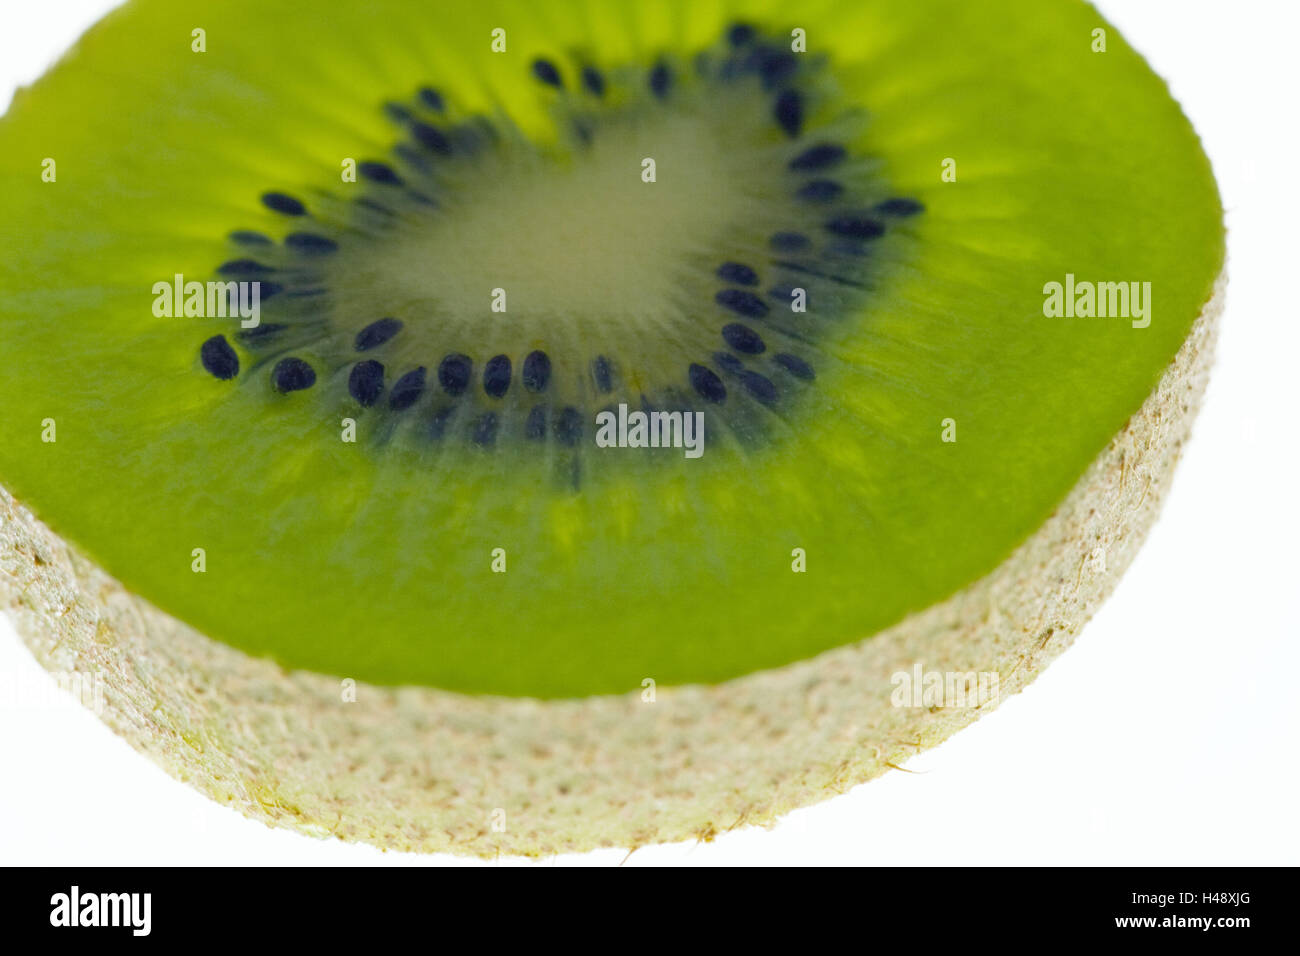 Kiwi, detail, cut open, slice, transmitted light, green, detail, Food, fruit, berries, kiwi fruits, fruits, ovally, flesh, green, fruit axis, cores, ripe, sweetly, sour, juicy, fruity, pale green, vitamins, freshness, curled, medium close-up, product photography, studio, Stock Photo